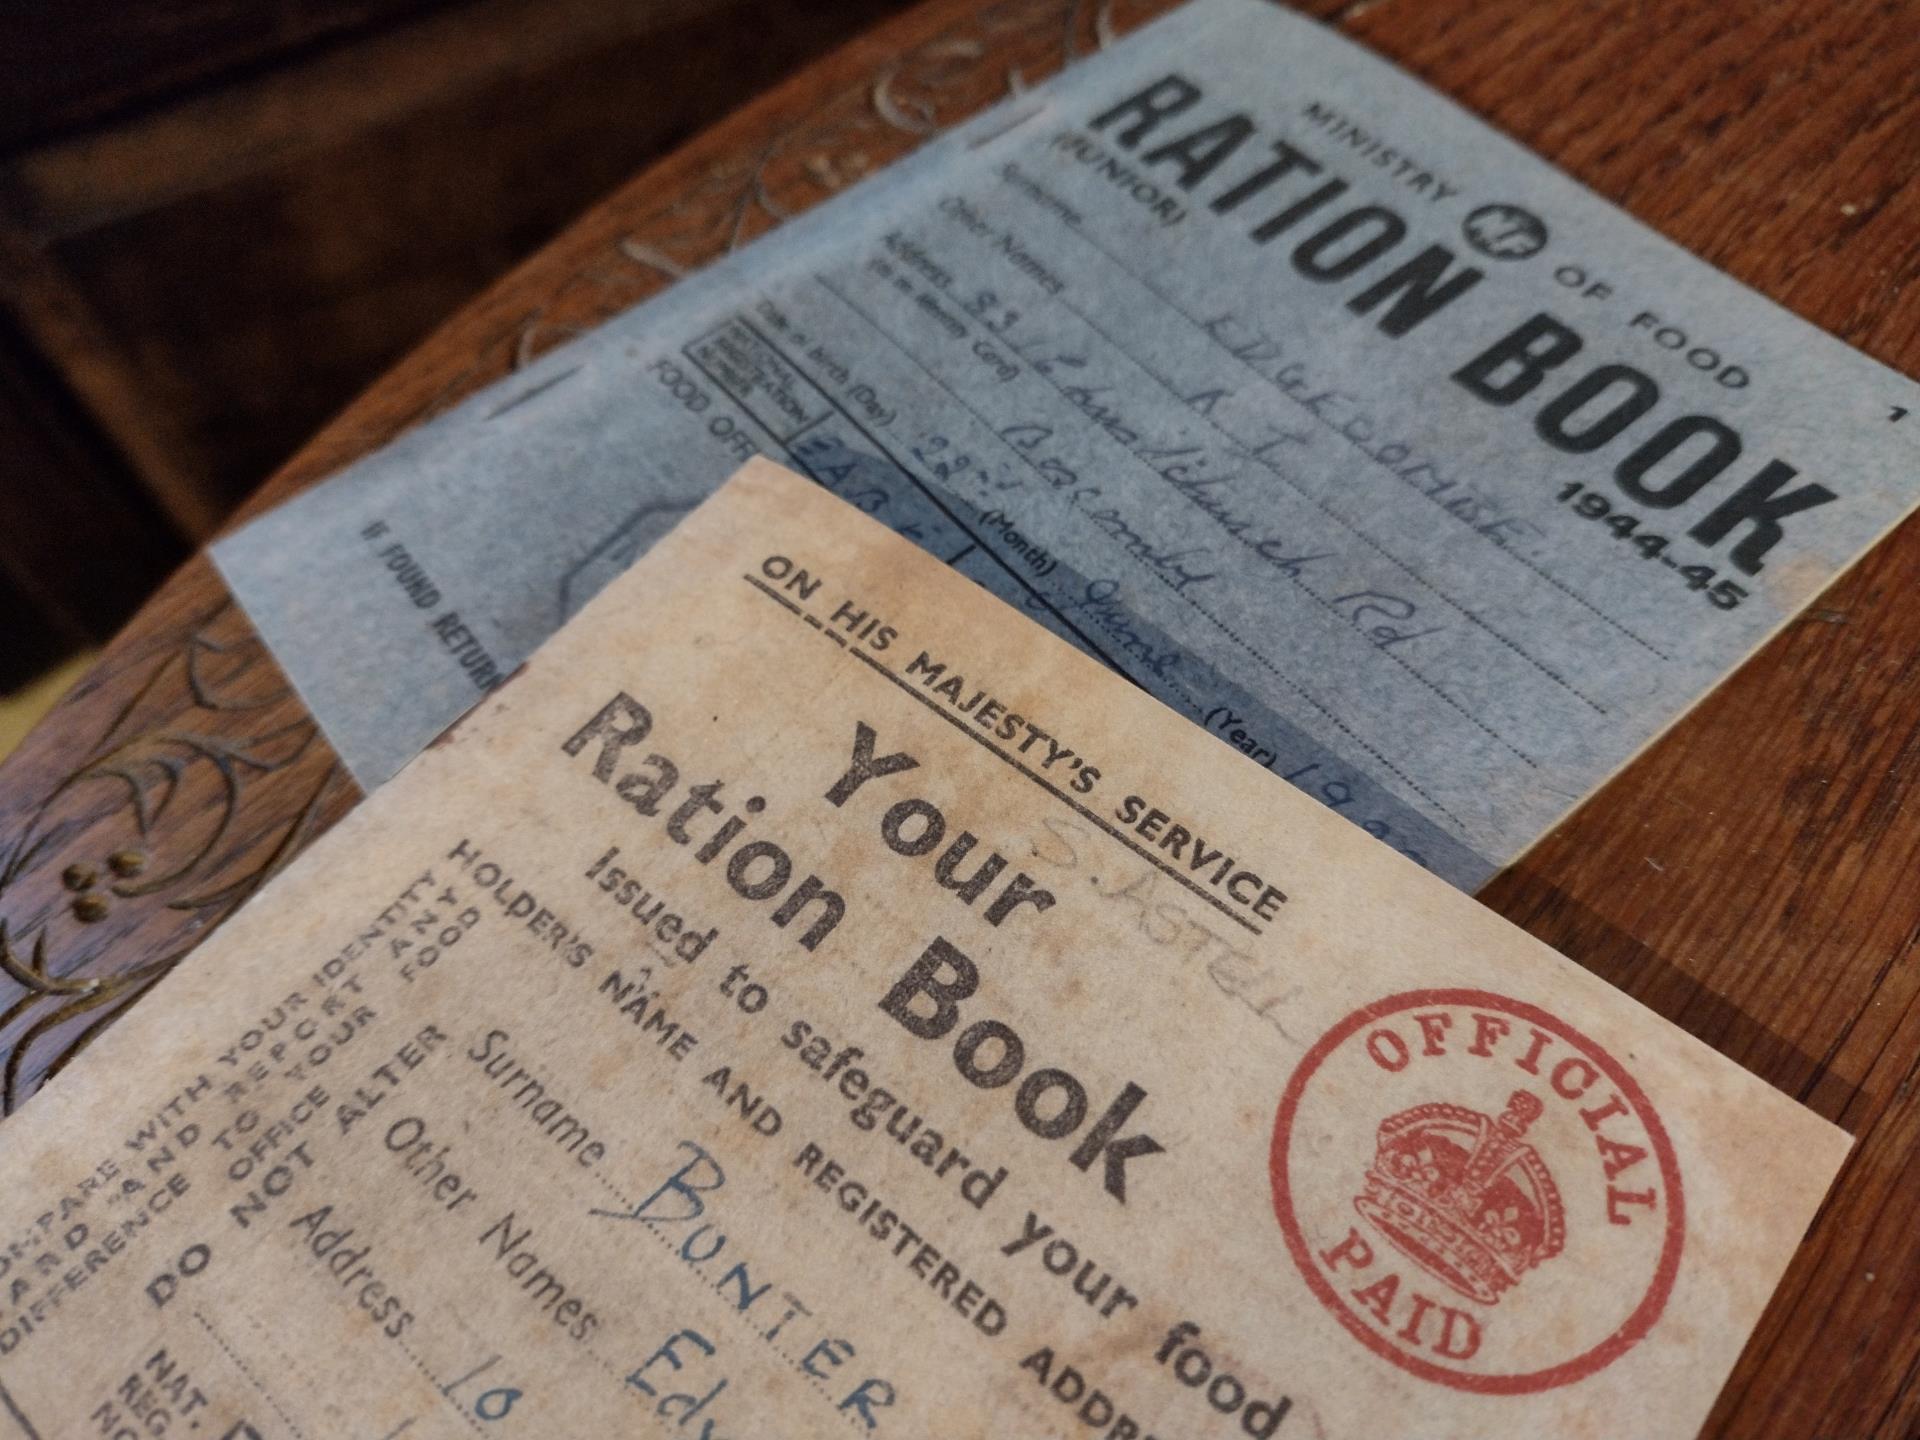 WWII ration books